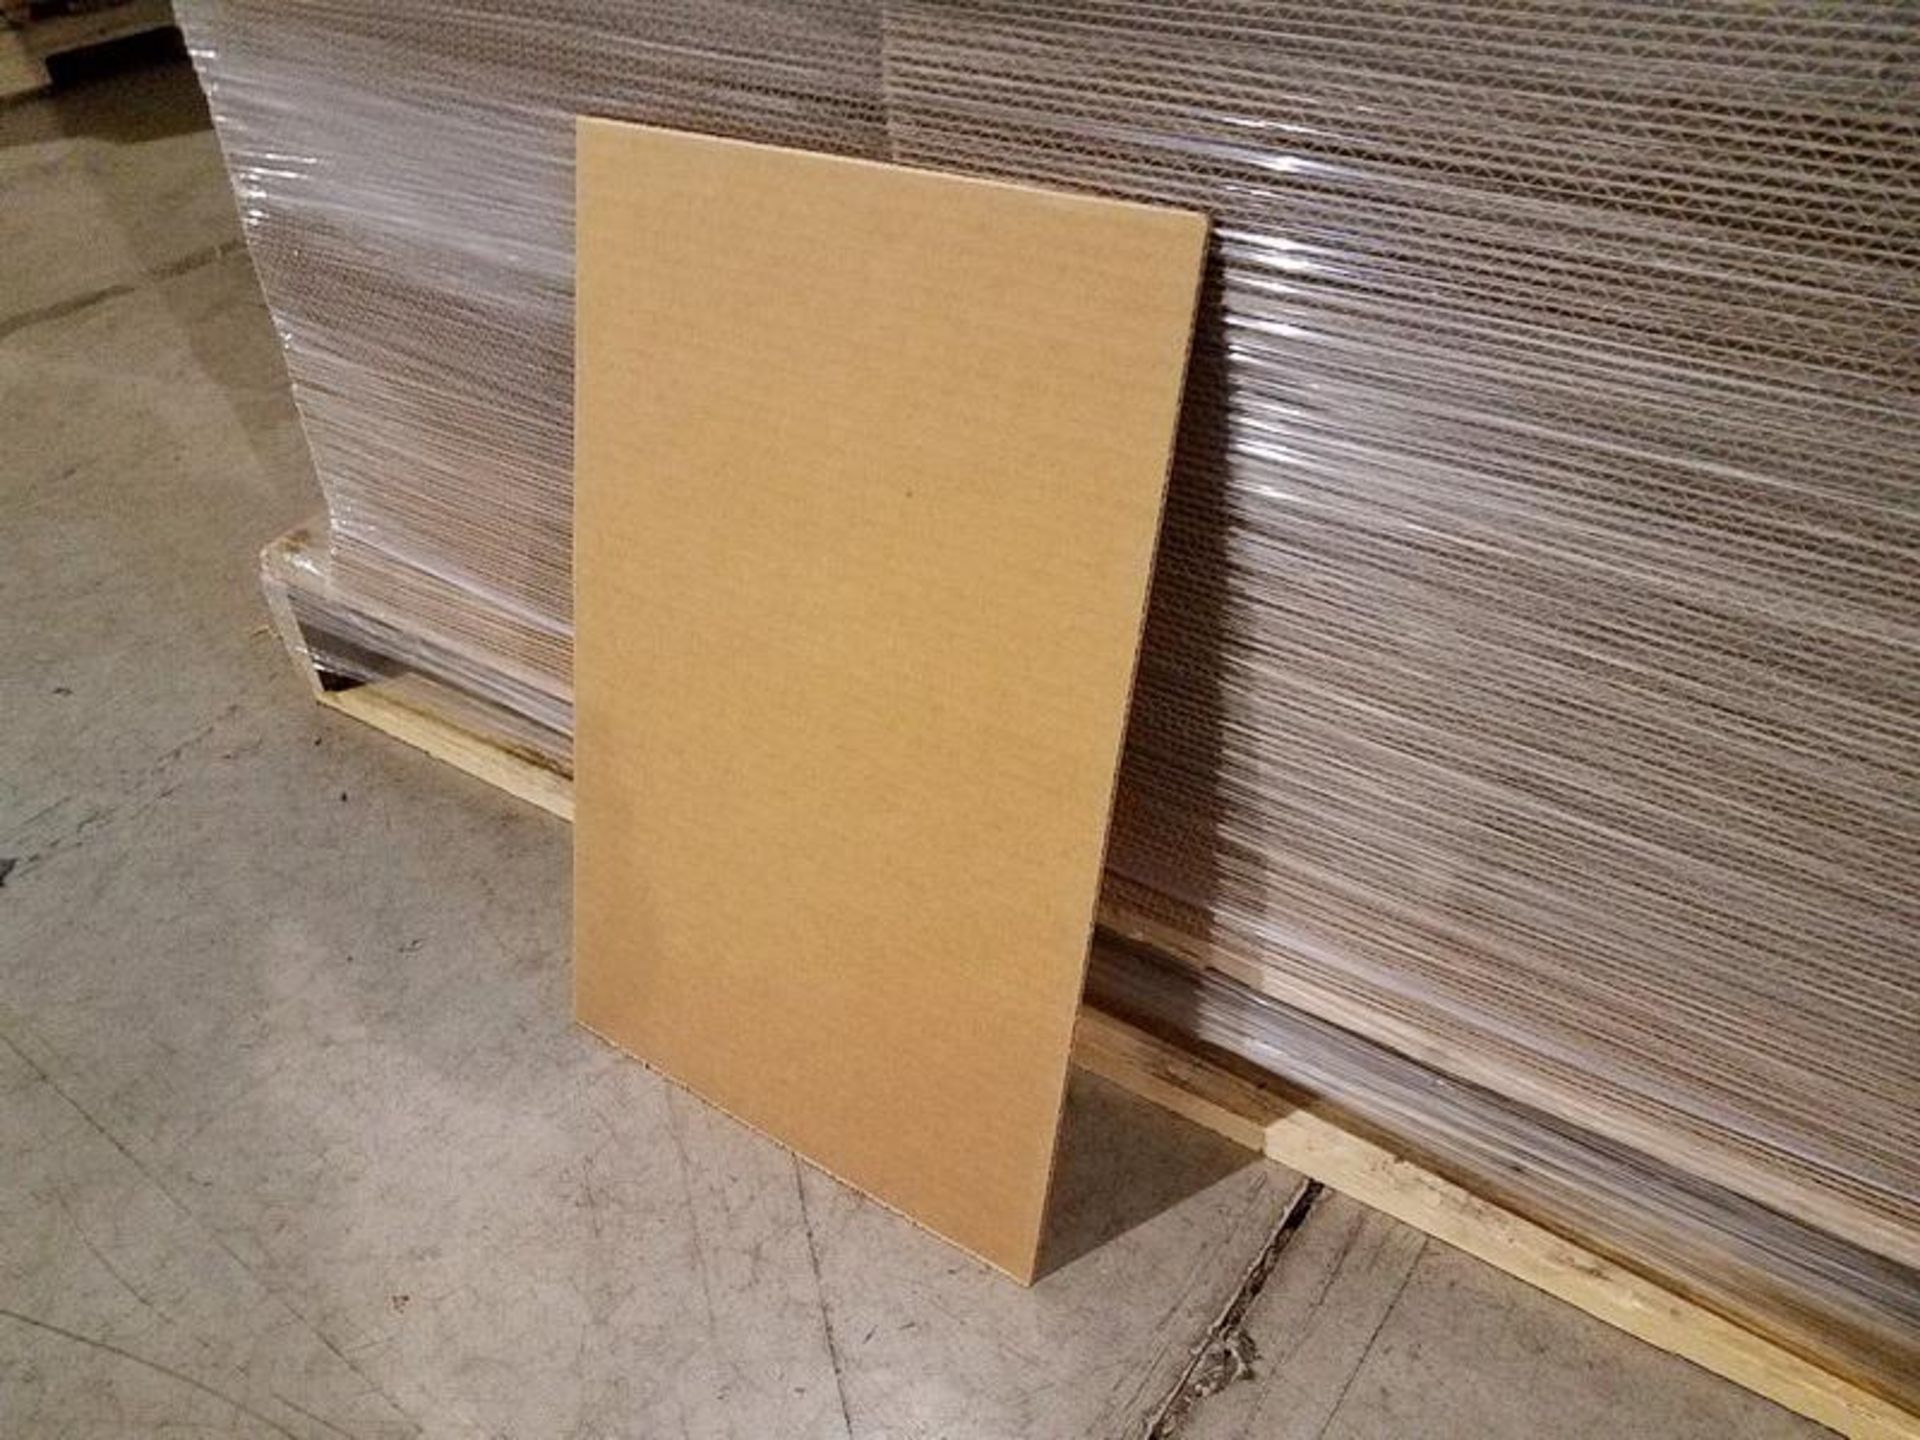 Lot Brant Box Corrugated Sheets, 11-1/8" x 17-1/8" - Image 2 of 3